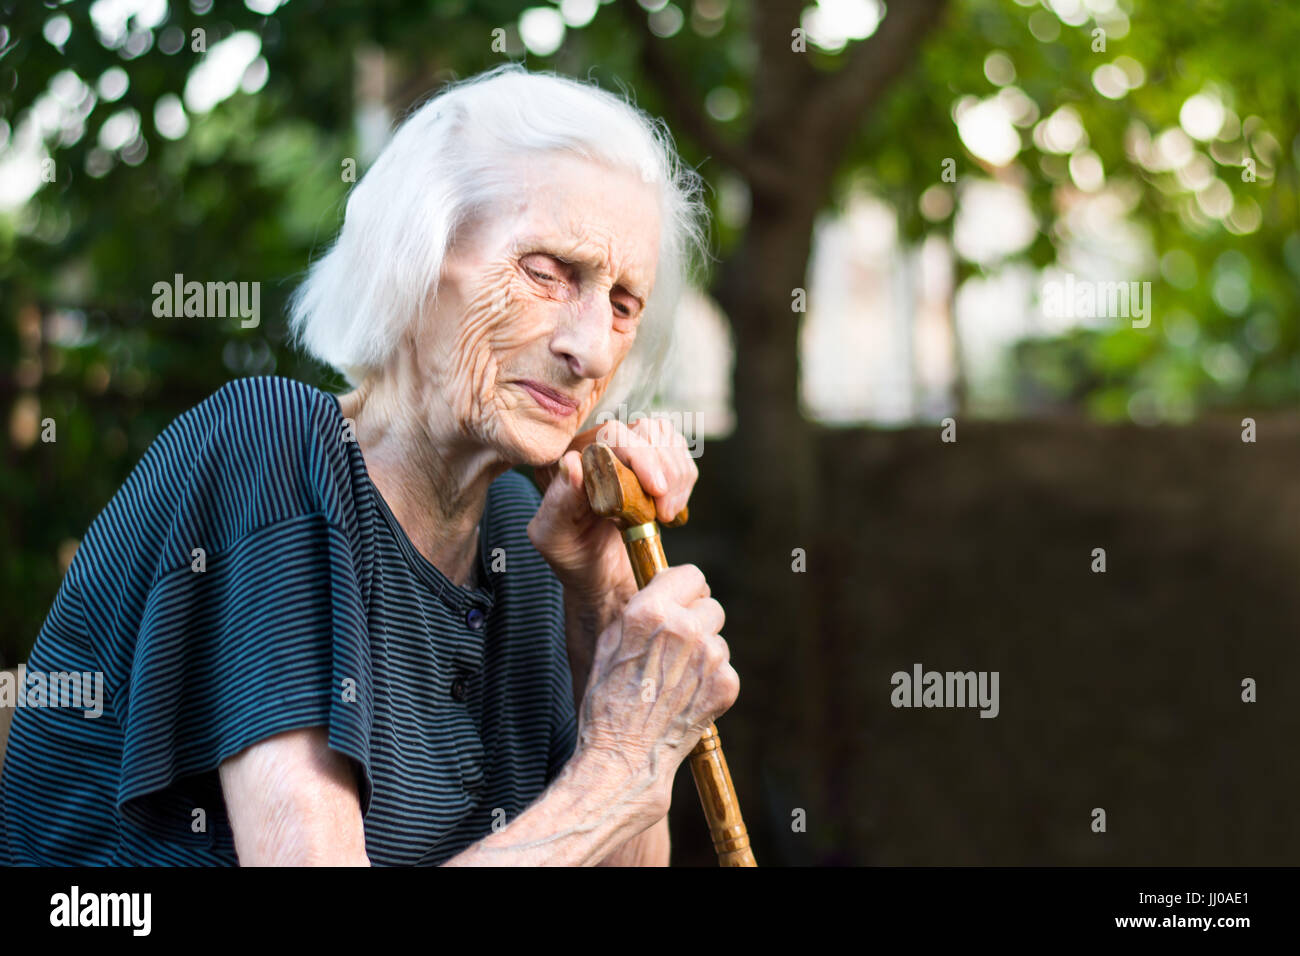 Senior woman crying with a walking cane outdoors Stock Photo